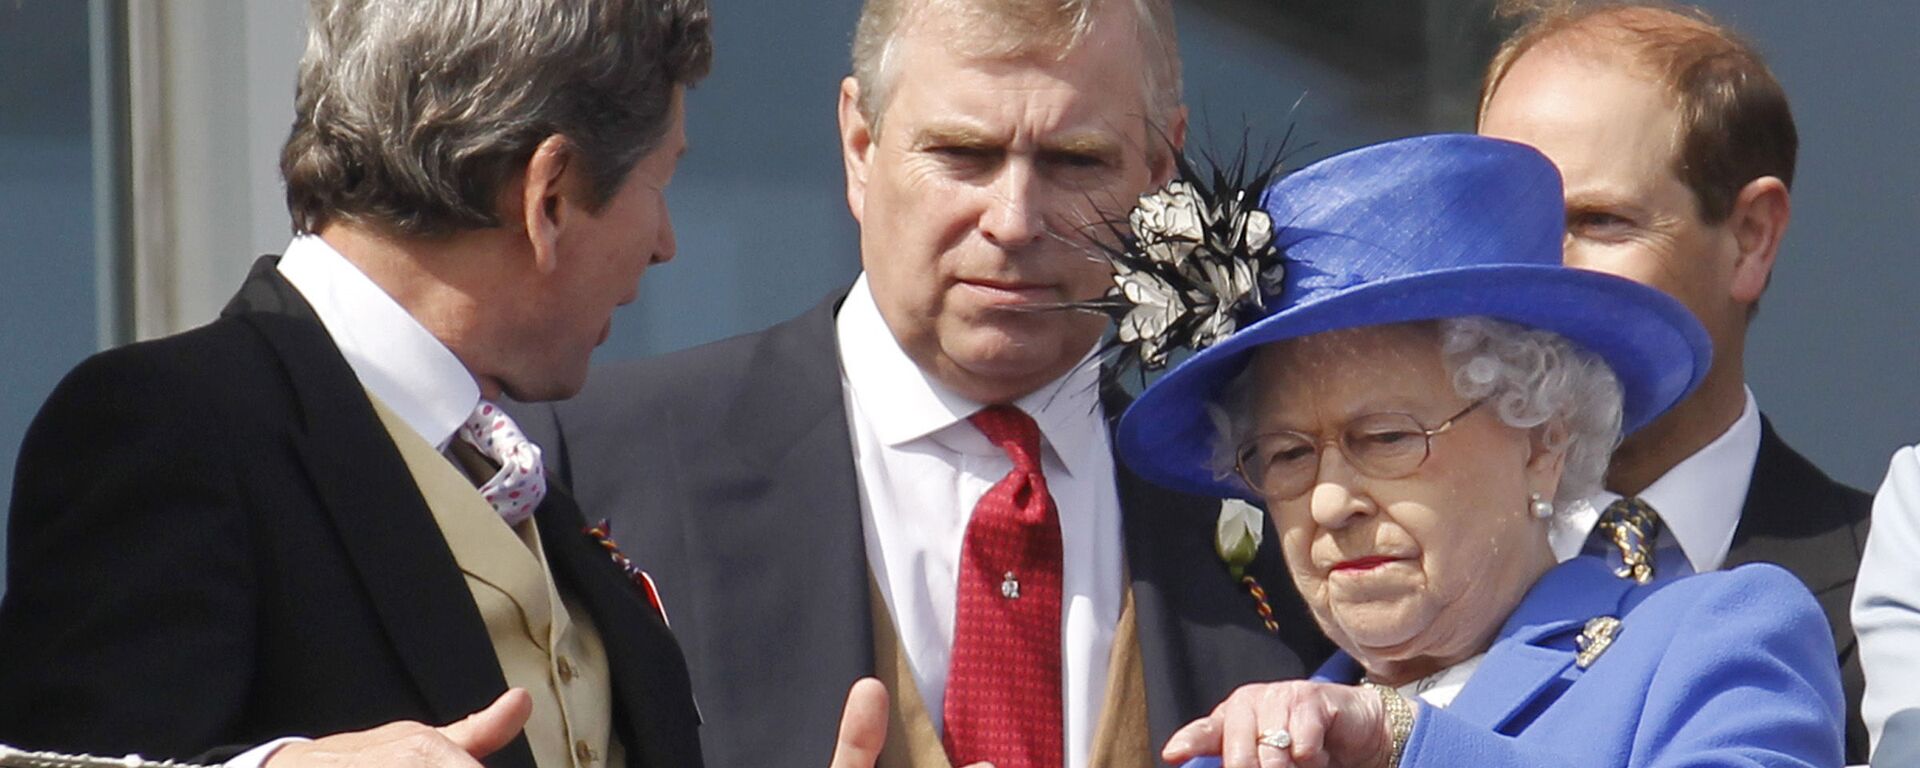 Britain's Queen Elizabeth II, right, talks to her son Prince Andrew, center, as she looks out from the balcony at the end of the Epsom Derby horse race at Epsom racecourse,  England at the start of a four-day Diamond Jubilee celebration to mark the 60th anniversary of  Queen Elizabeth II accession to the throne, Saturday, June 2, 2012 - Sputnik International, 1920, 04.08.2020